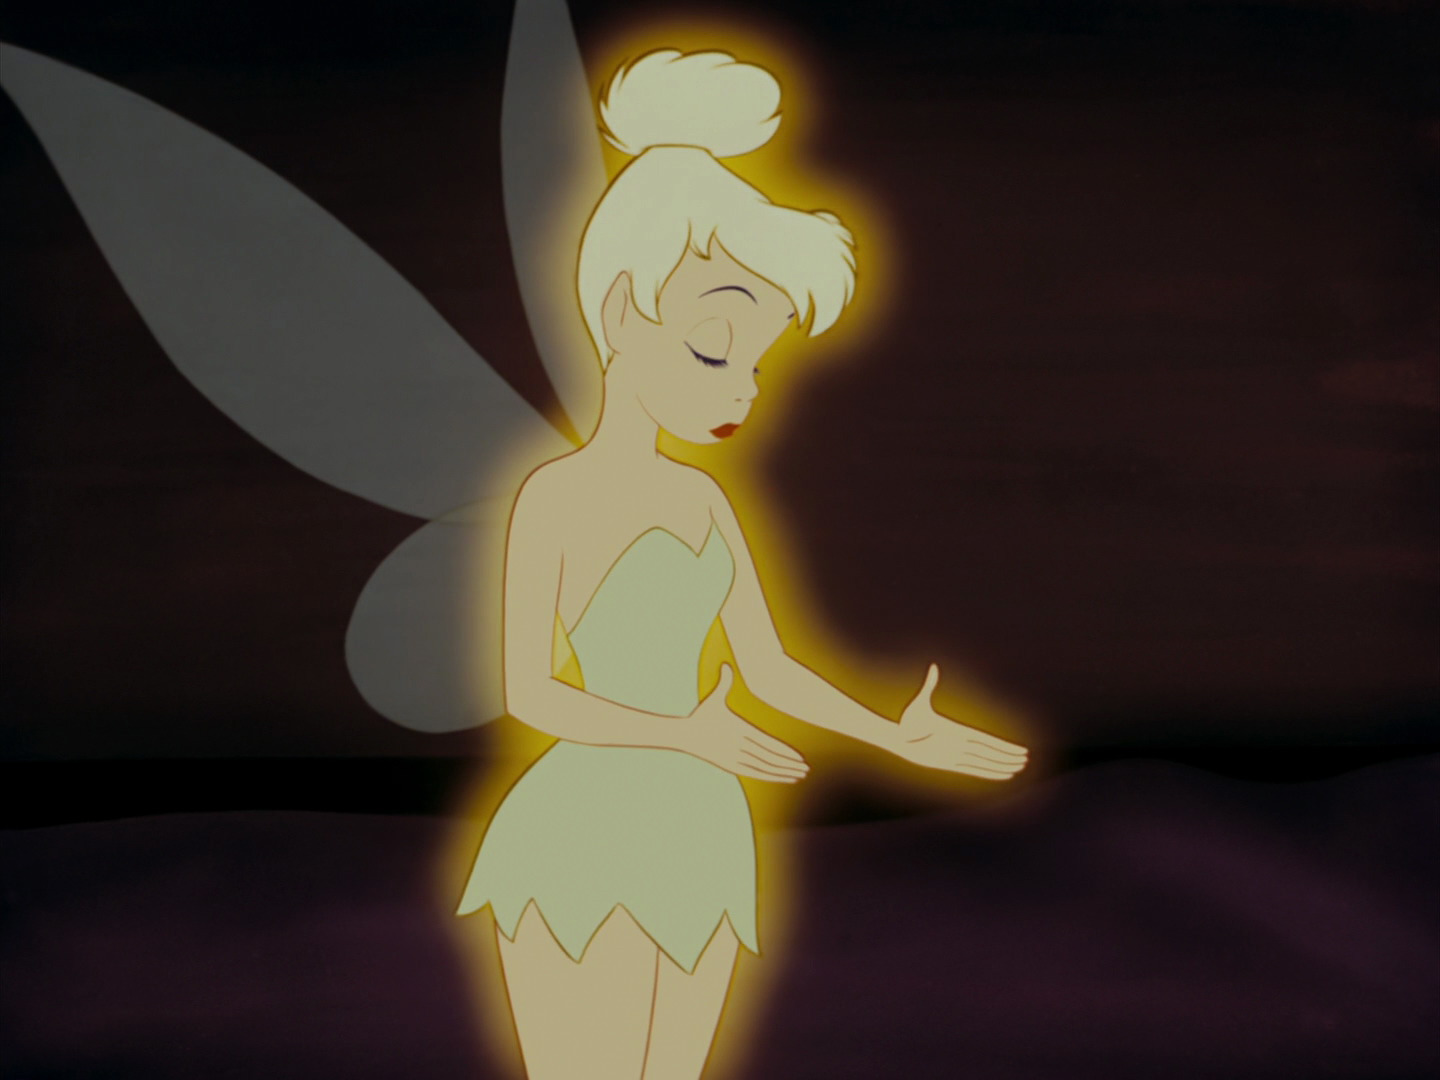 Photo of Tinkerbell Screencap for fans of Disney's Peter Pan. 